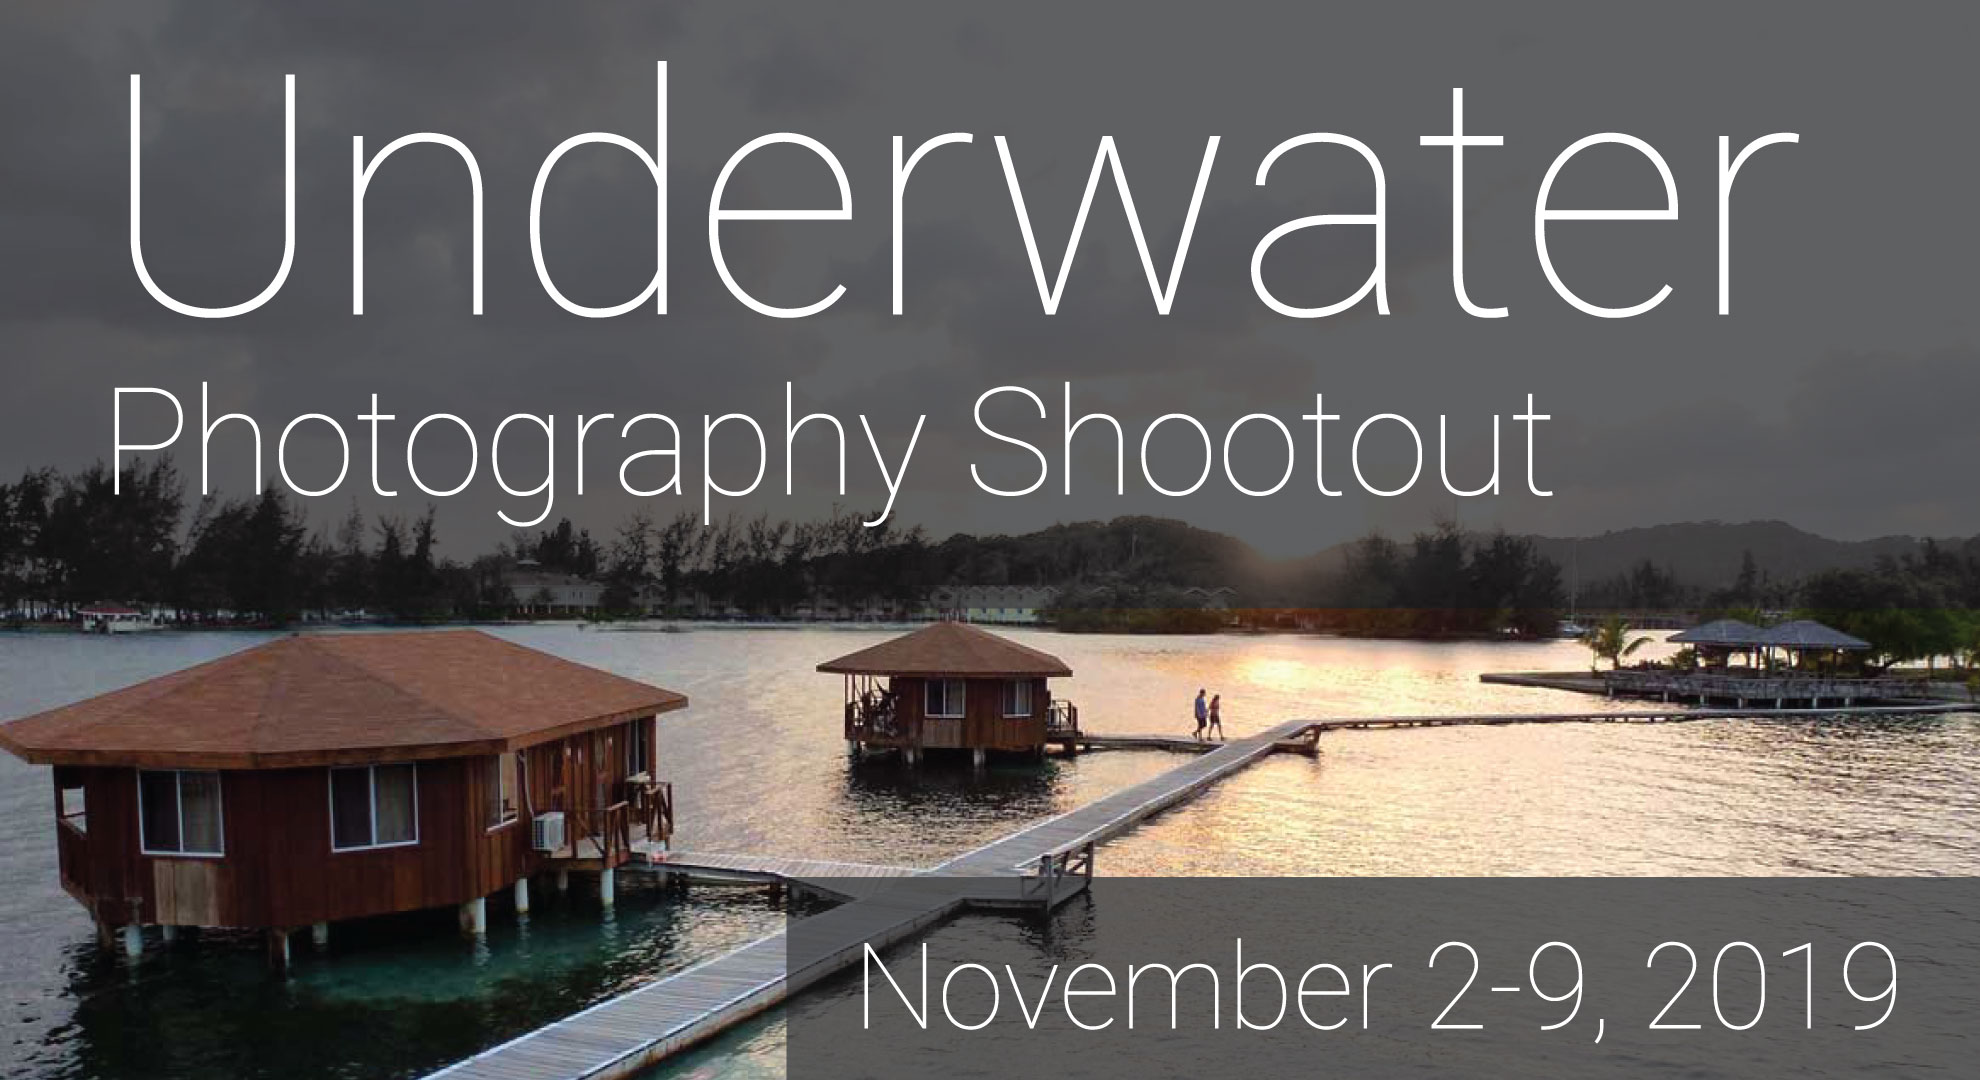 Underwater Photography Shootout